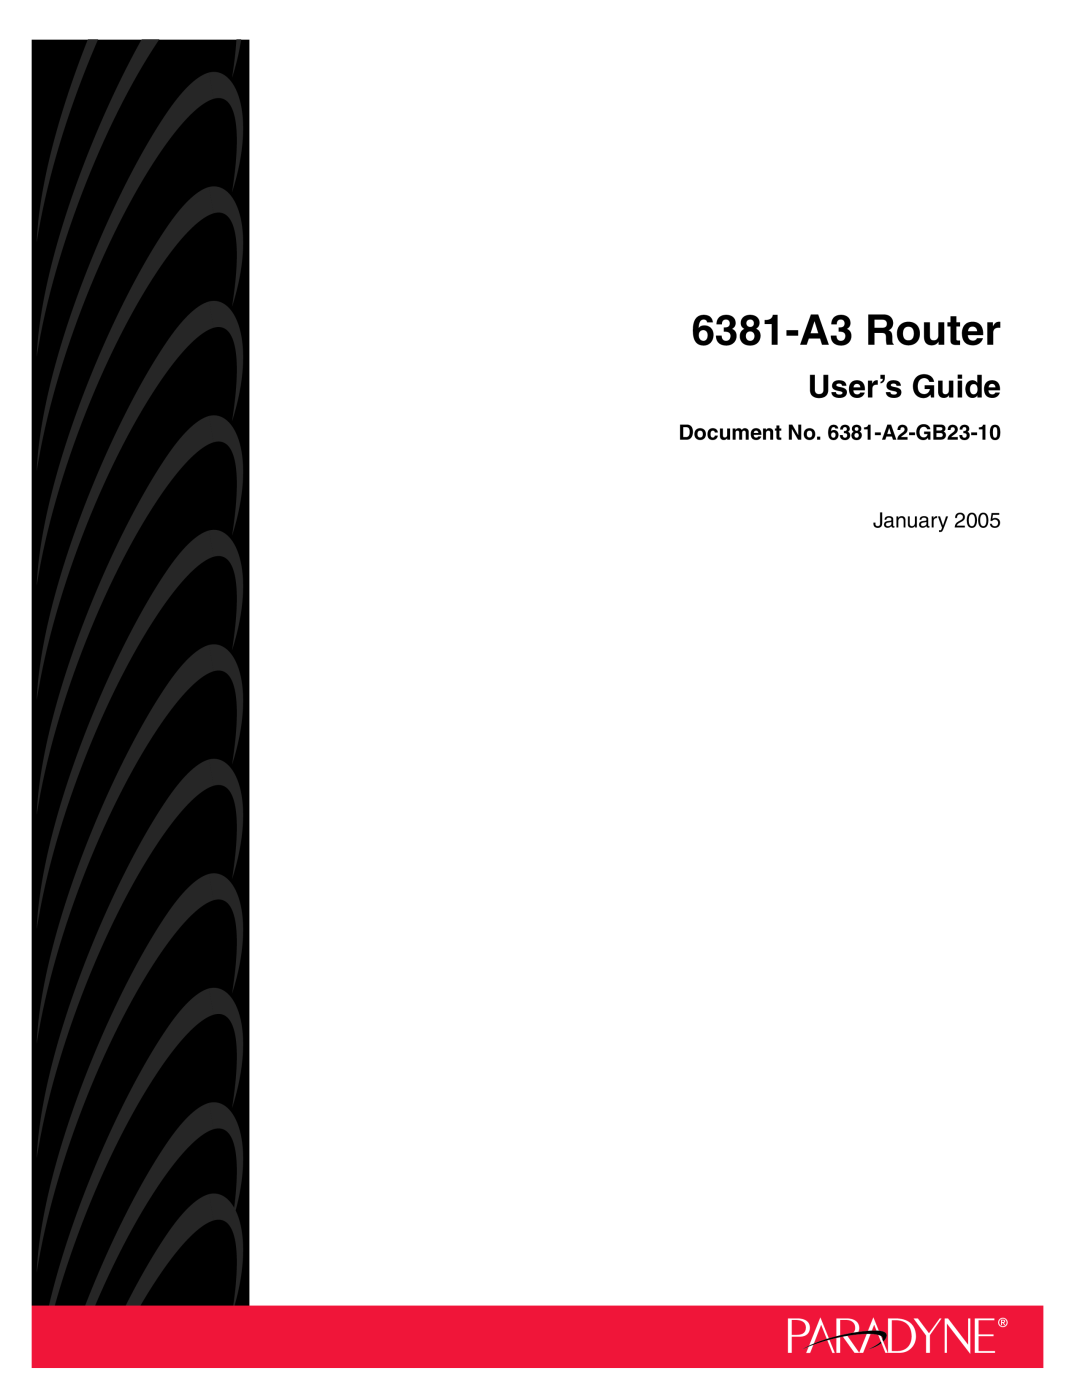 Paradyne manual 6381-A3 Router, User’s Guide, Document No. 6381-A2-GB23-10, January 